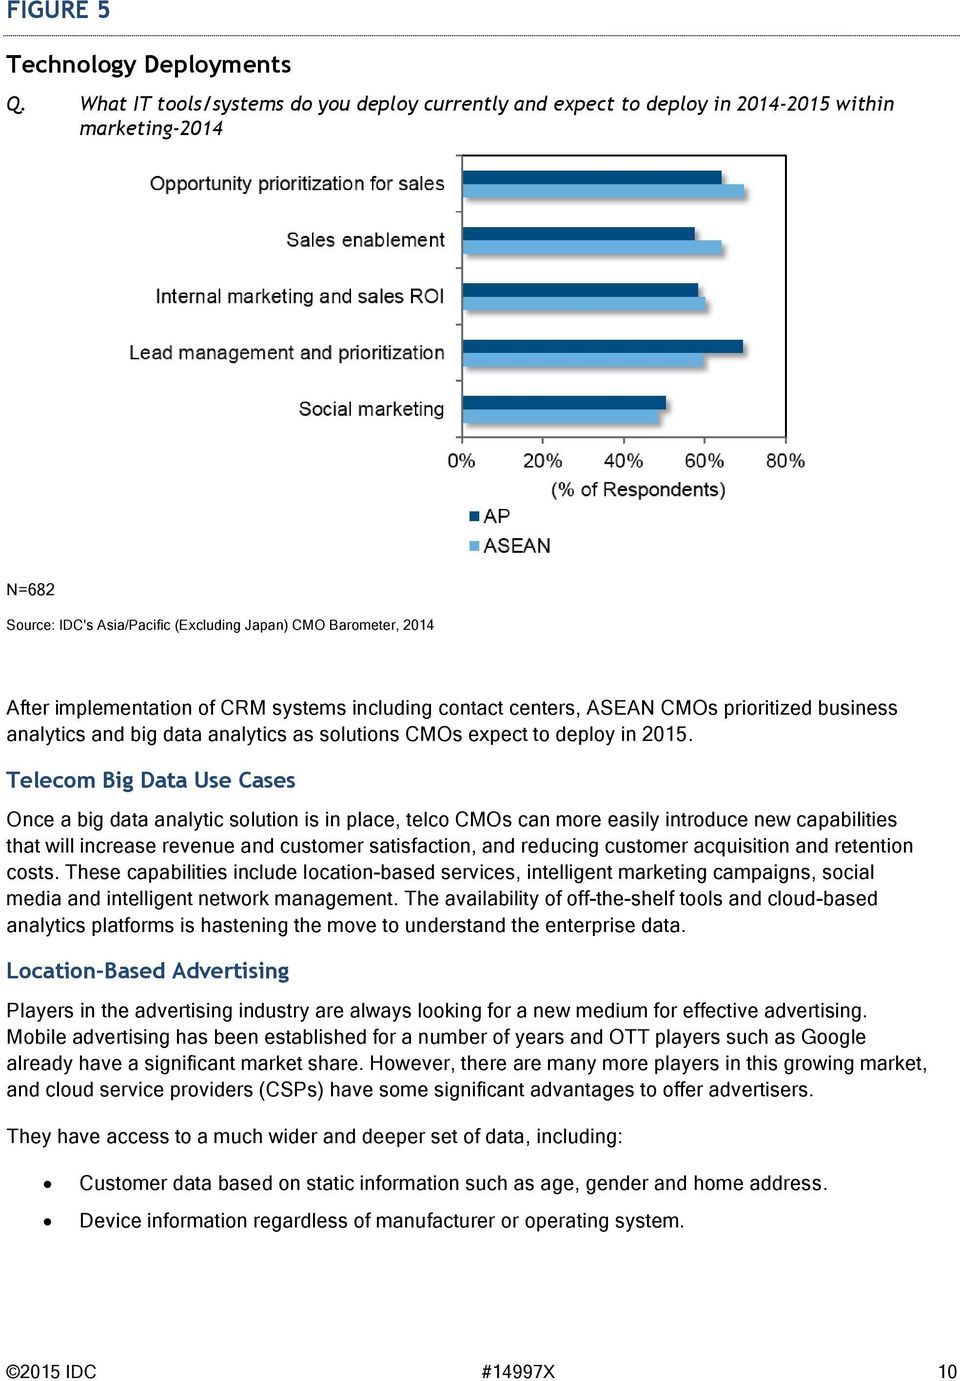 CRM systems including contact centers, ASEAN CMOs prioritized business analytics and big data analytics as solutions CMOs expect to deploy in 2015.